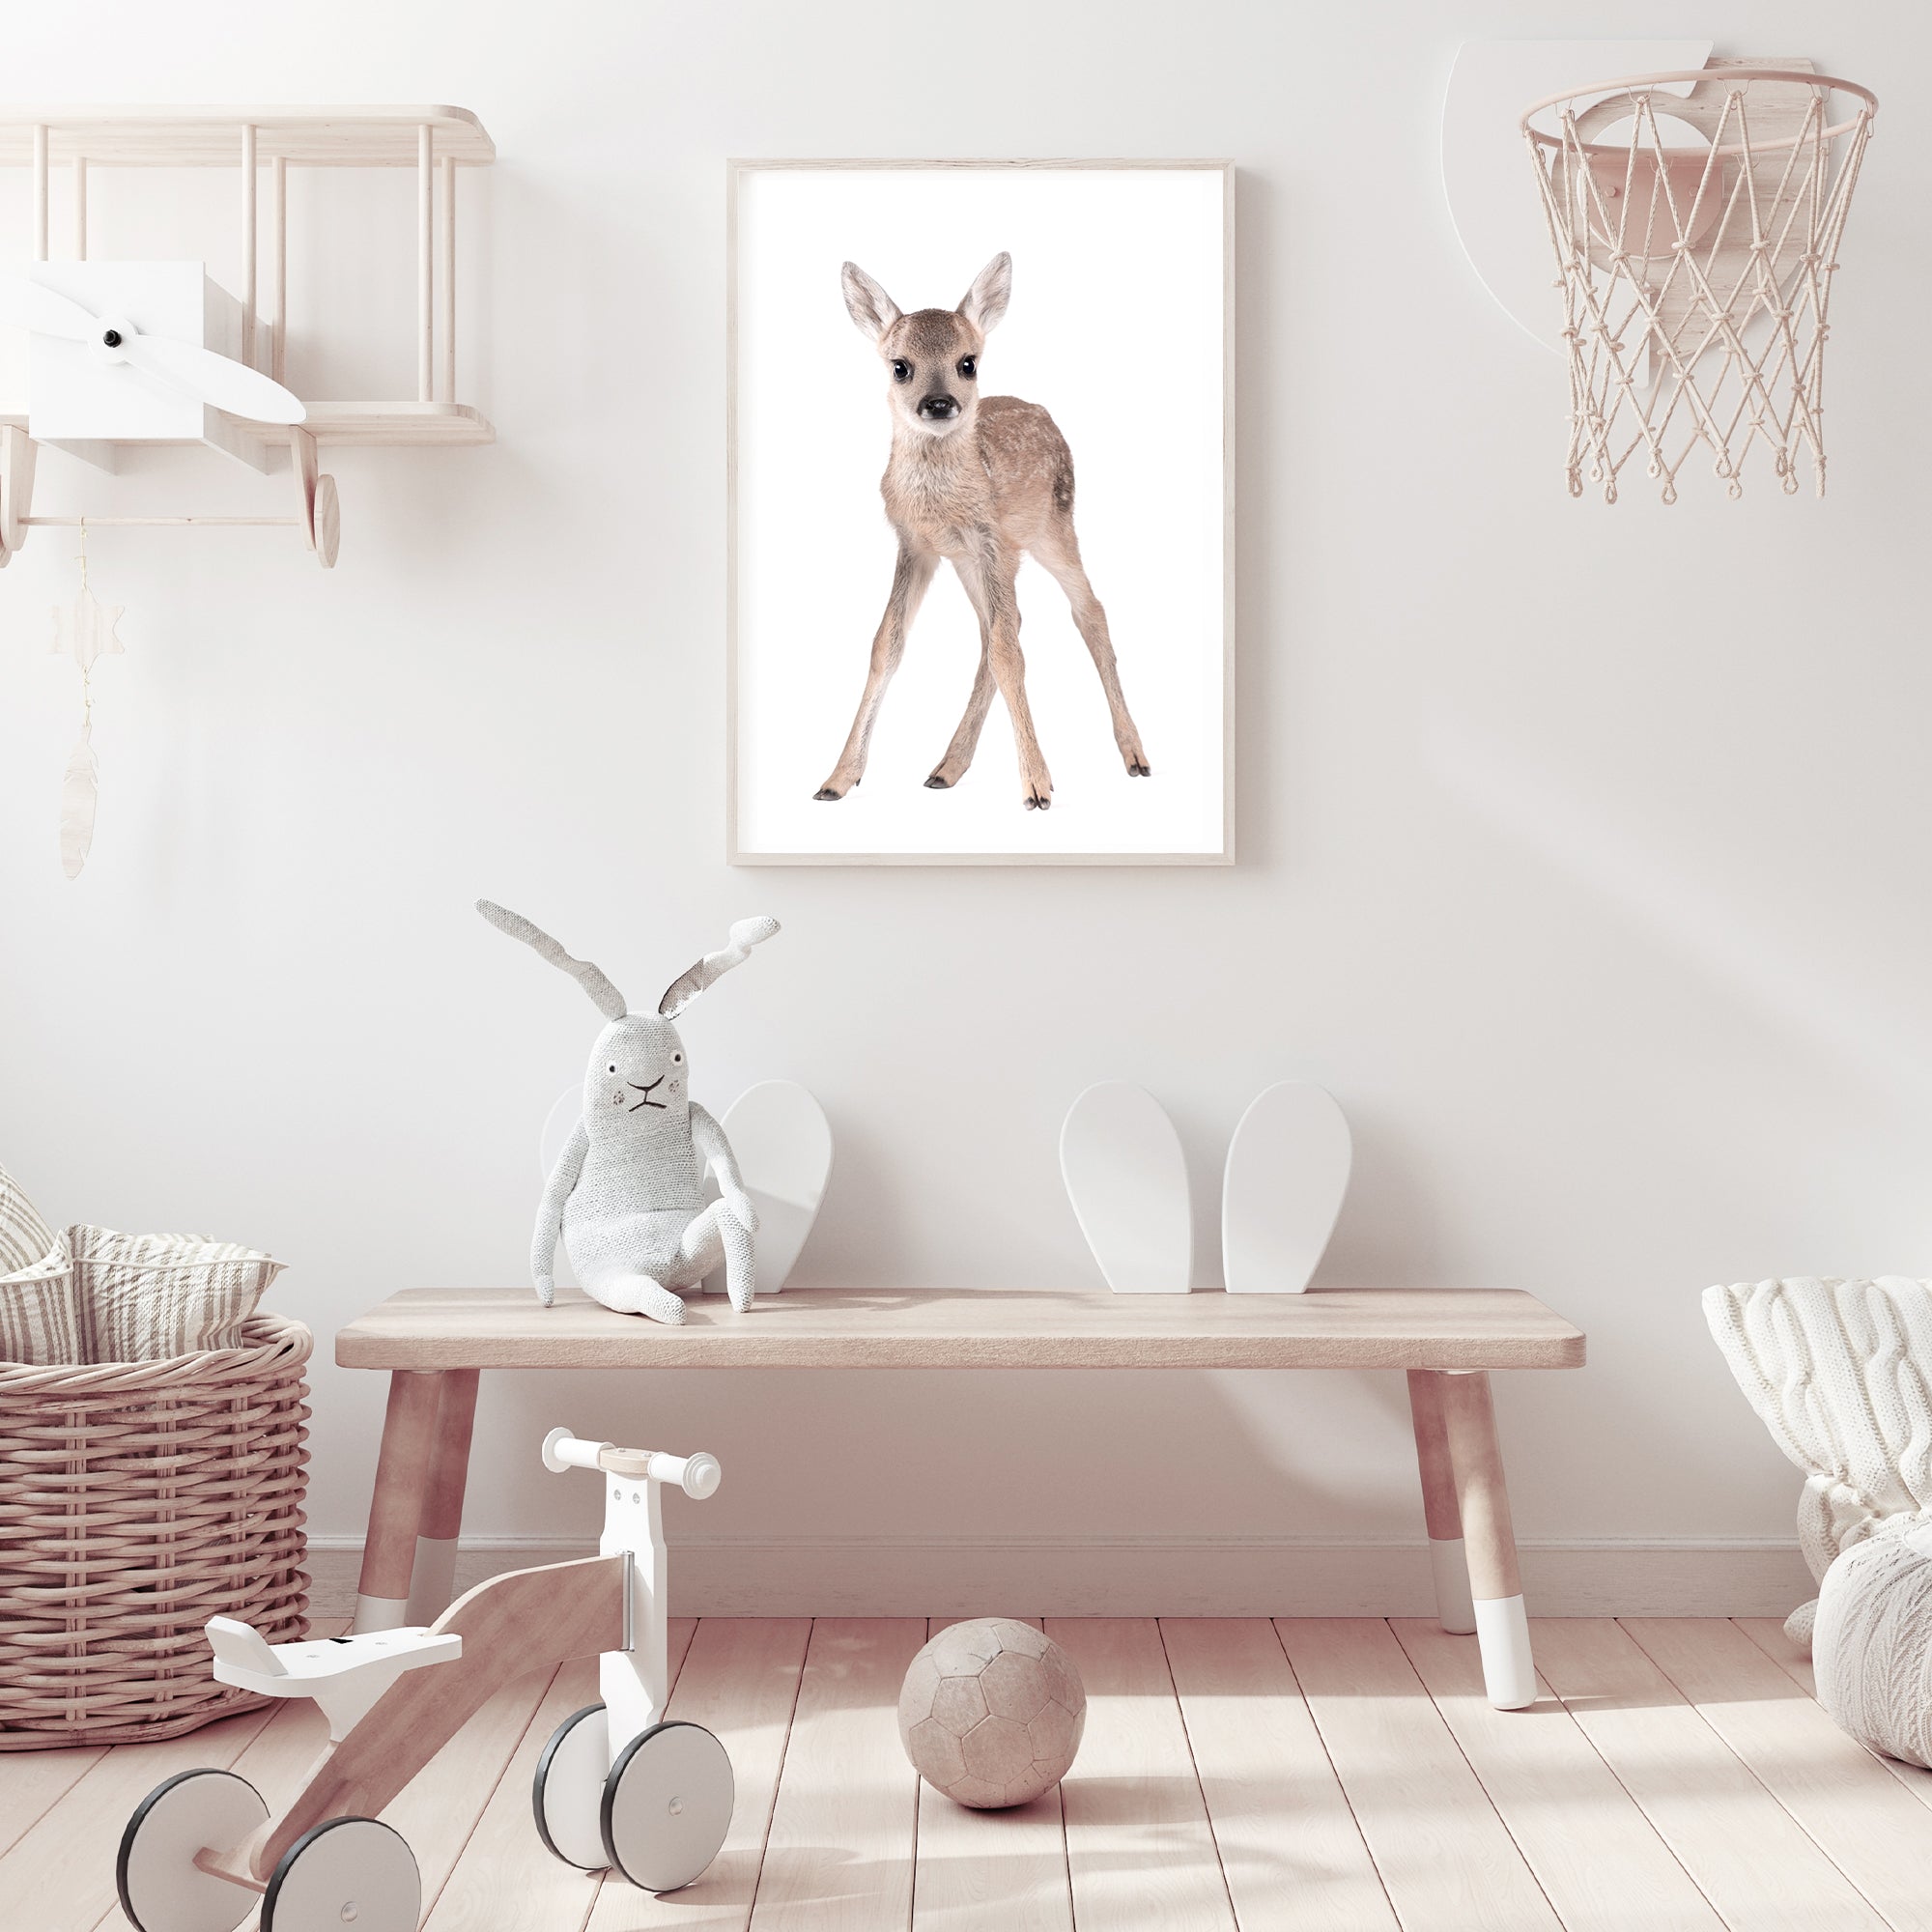 Featuring the Animal Baby Deer photo art print, available in an unframed poster print, stretched canvas or with a timber, white or black frame.